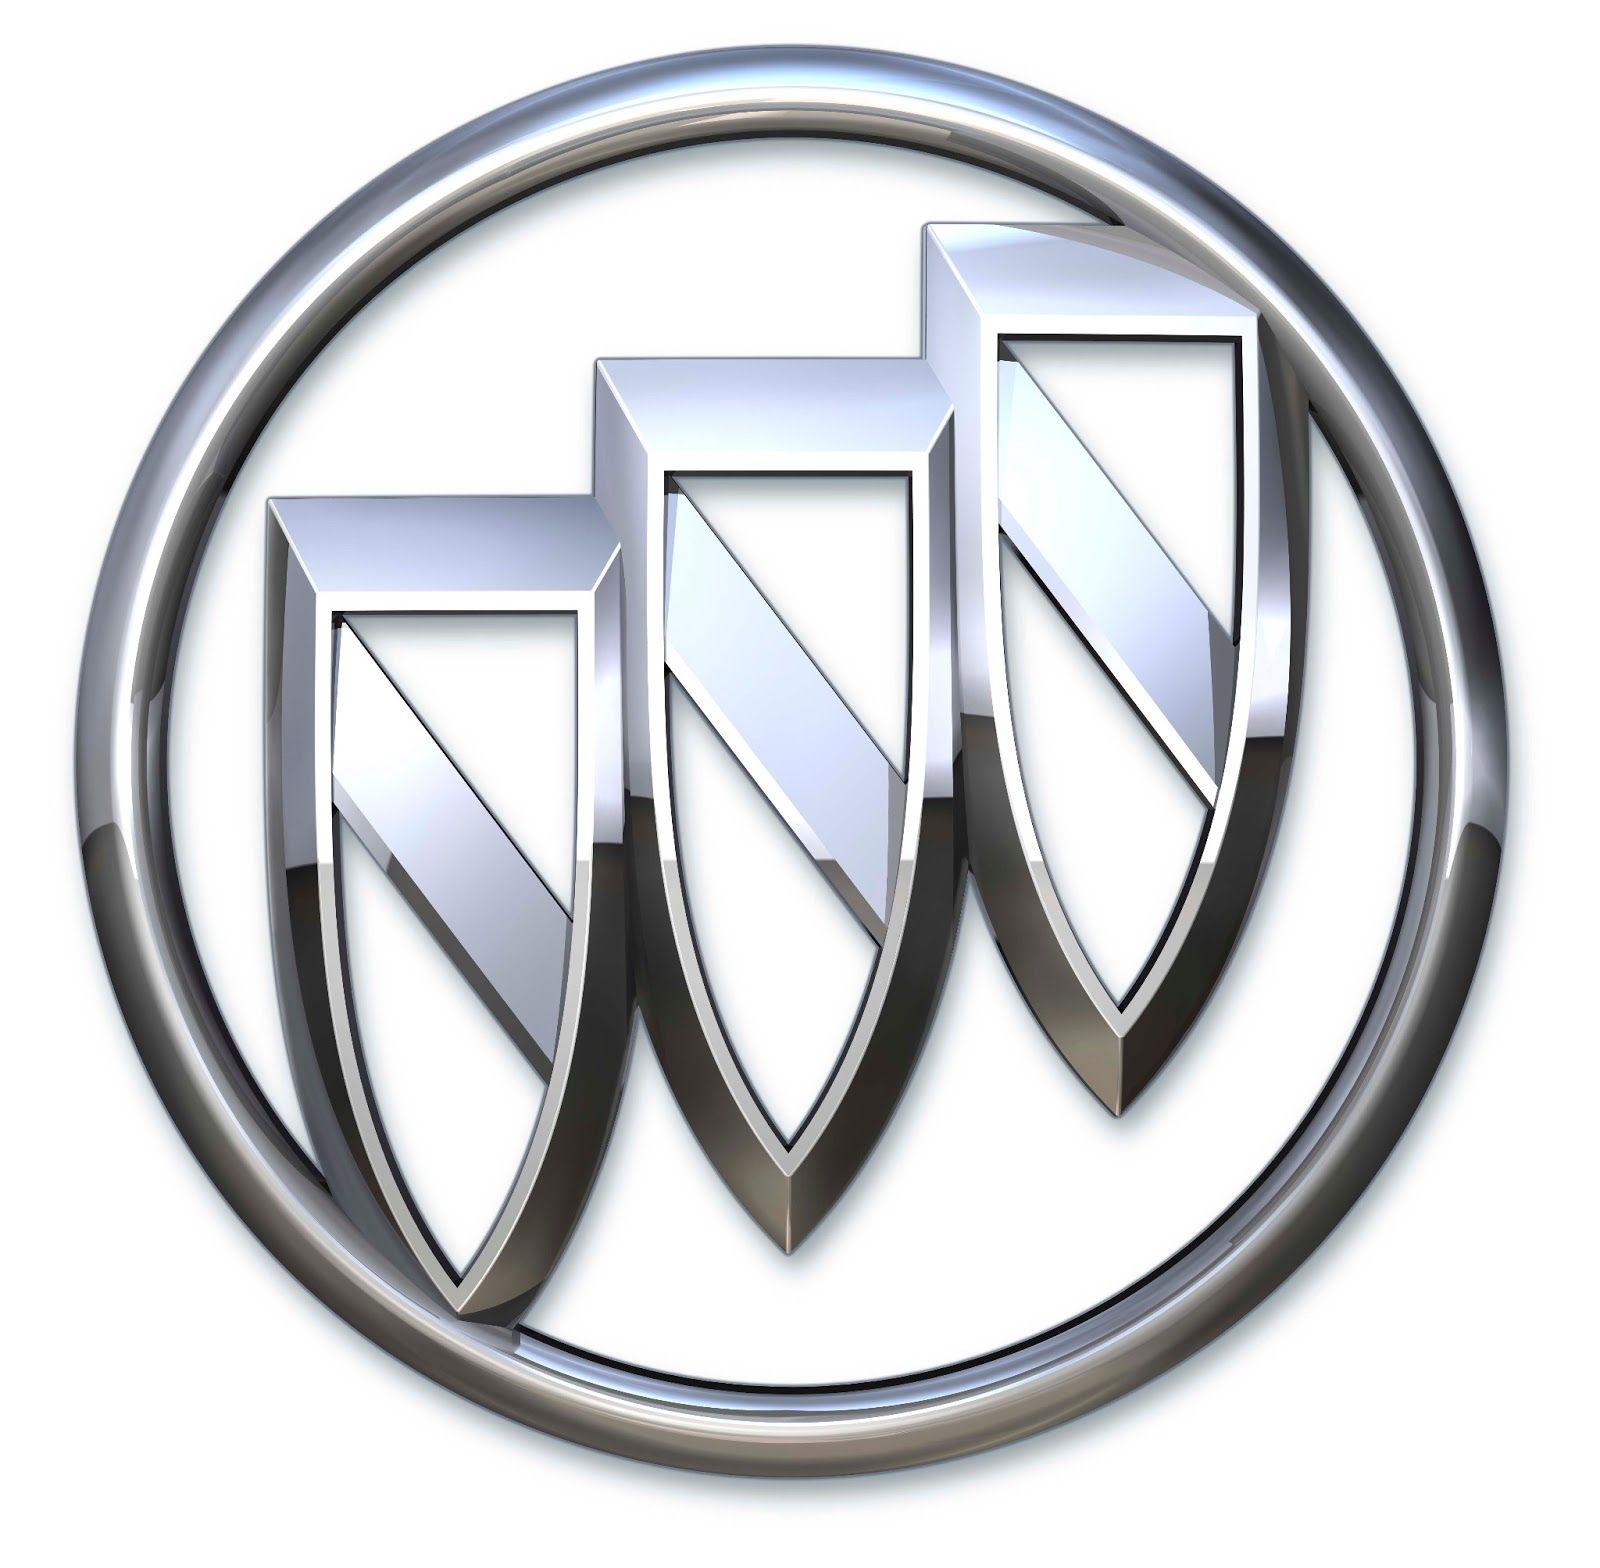 Red and White Shield Automotive Logo - Buick Logo, Buick Car Symbol Meaning and History | Car Brand Names.com